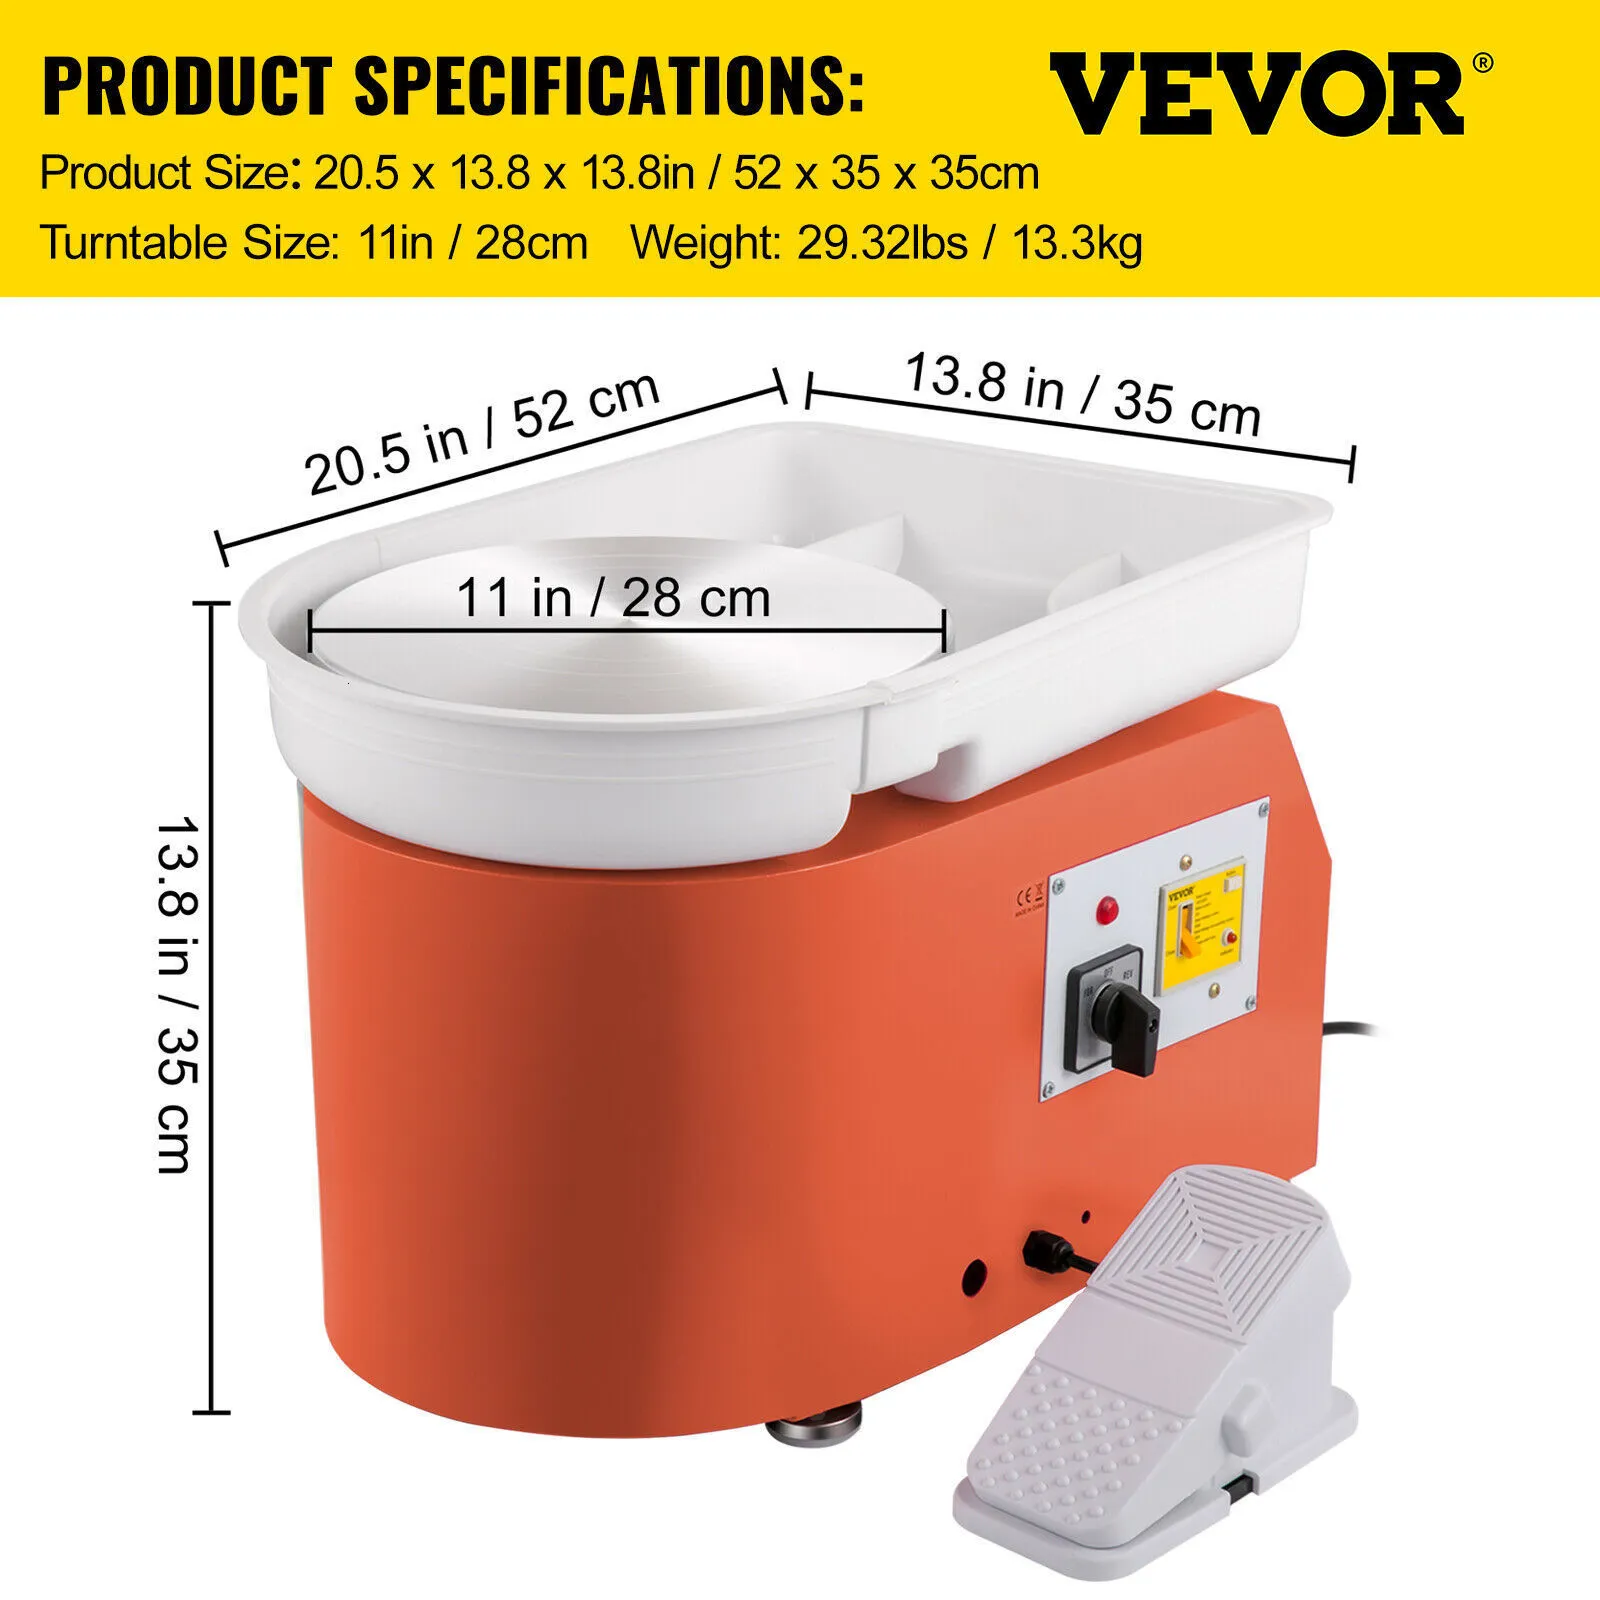 VEVOR Pottery Wheel 28cm 350W Electric Machine Manual Foot Pedal, Ceramic  Clay Working Tool For Schools & DIY Art Craft. From Deng10, $130.85